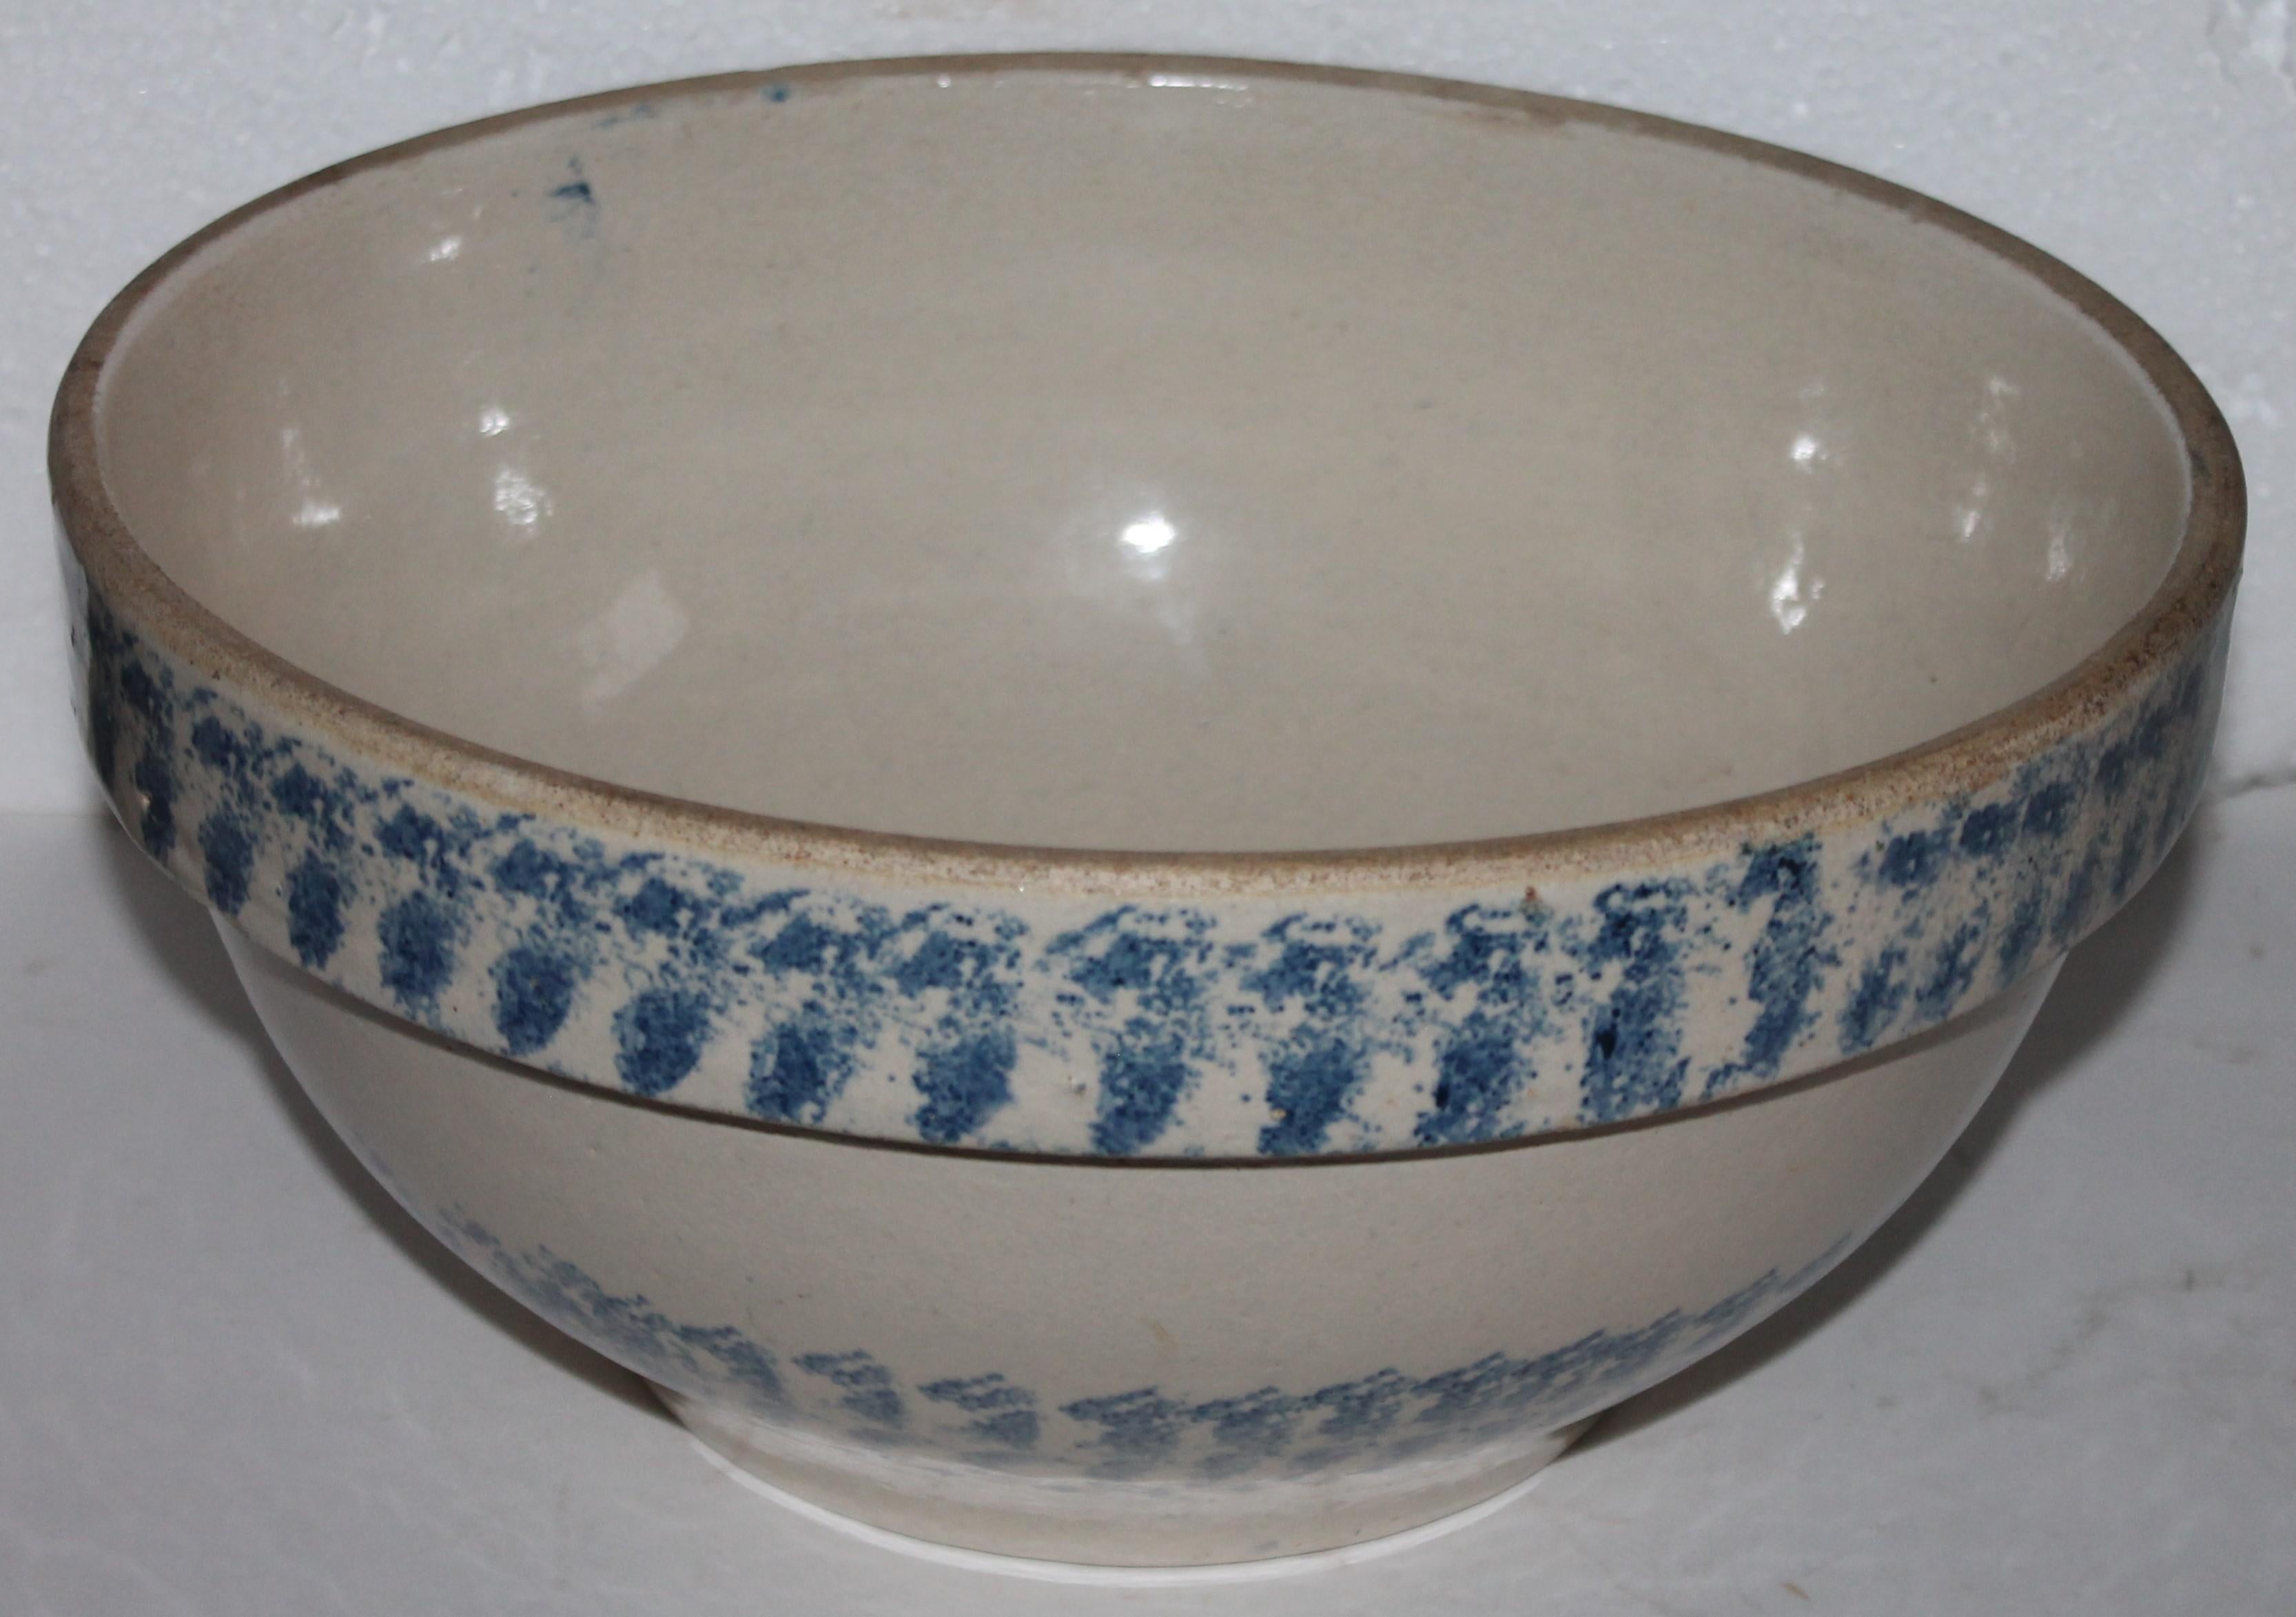 This 19th century pattern sponge ware pottery batter bowl is in fine condition. It is most unusual form and pottery type. This is a handmade pottery bowl.